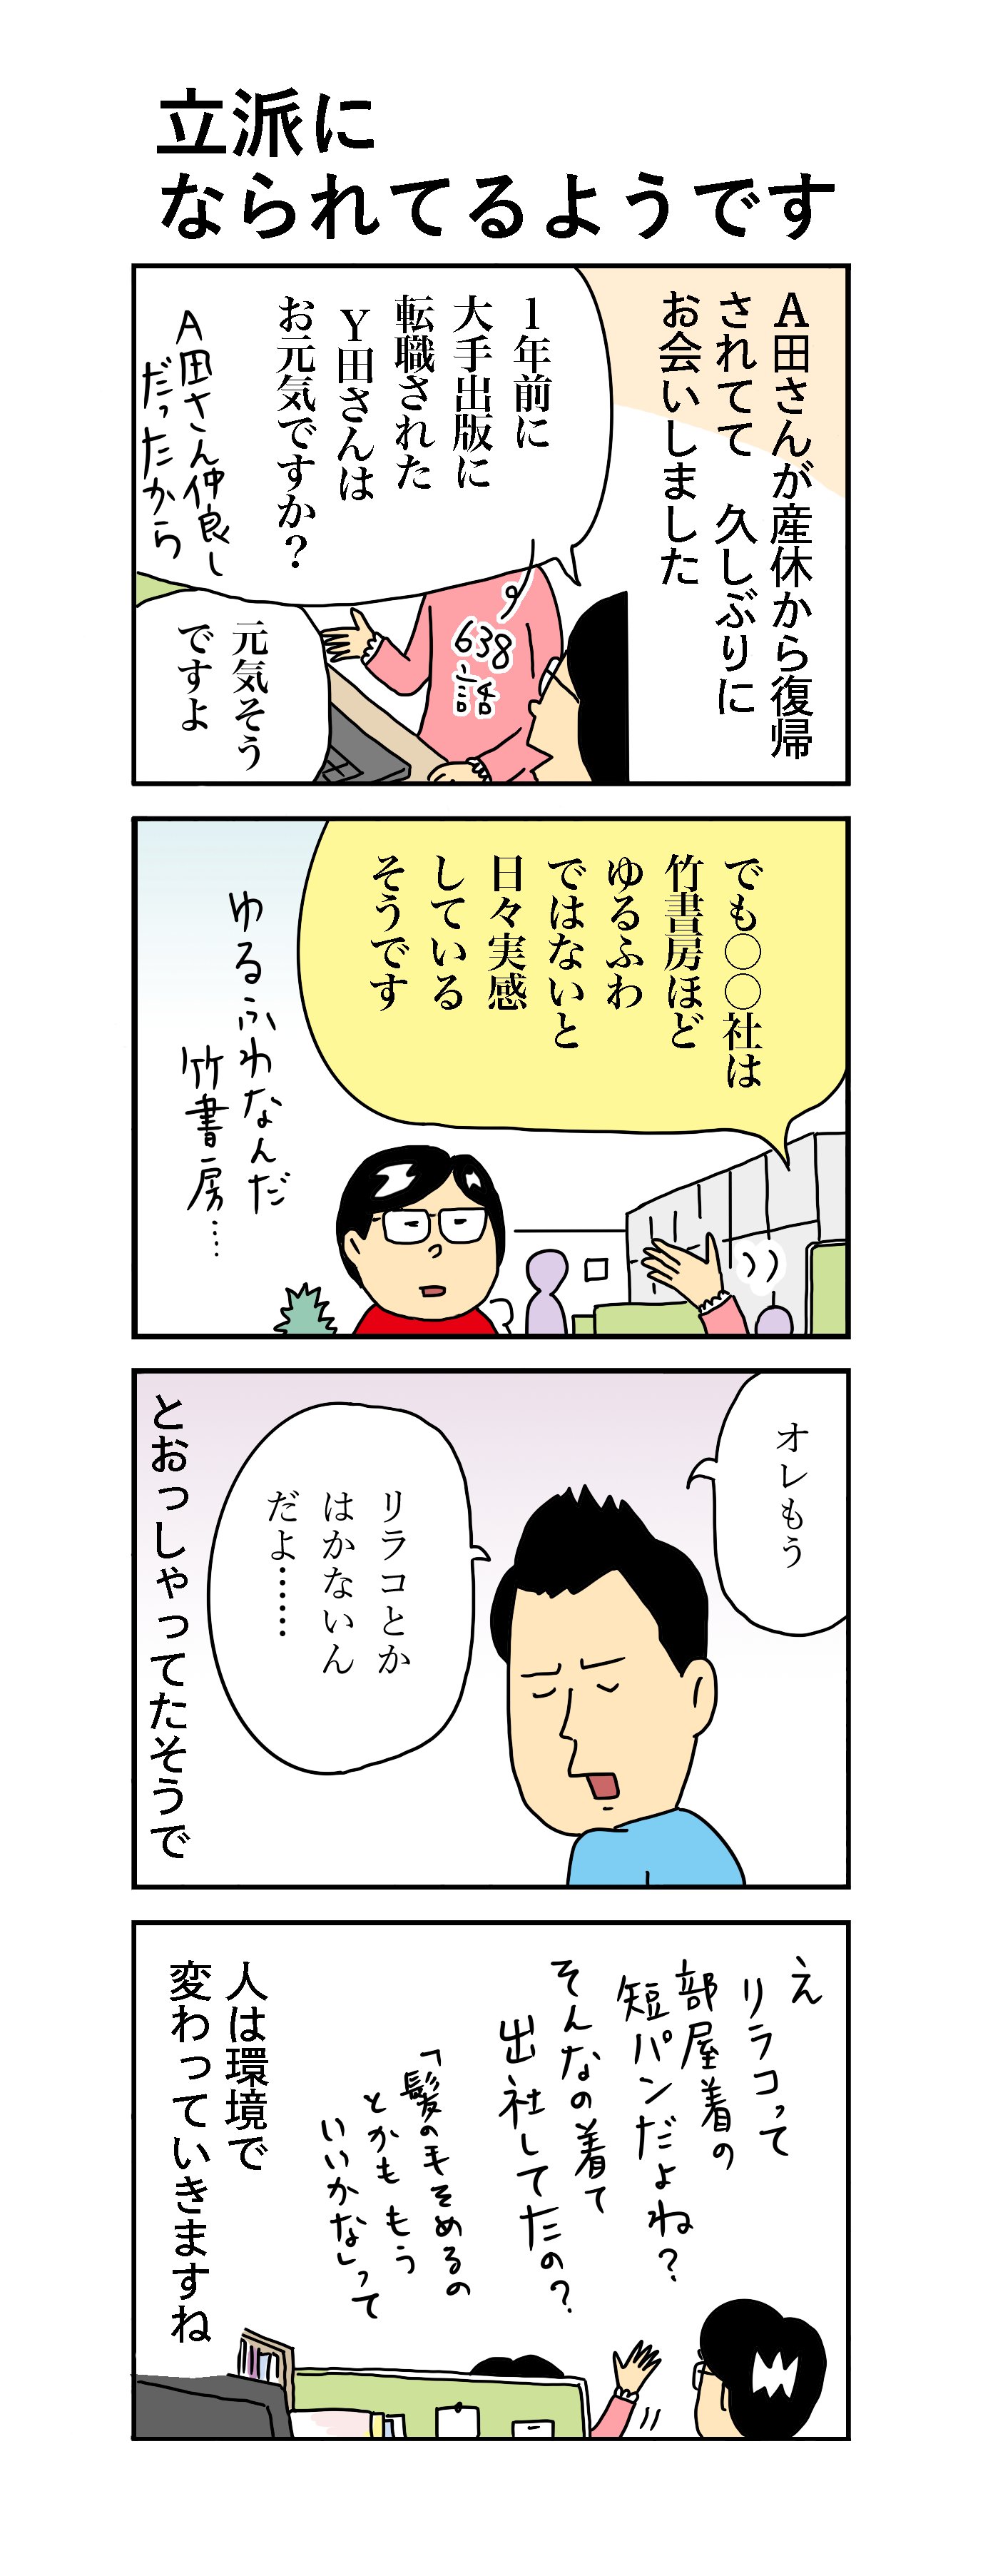 Tweets With Replies By 竹書房４コマ編集部 Takeshobo4koma Twitter